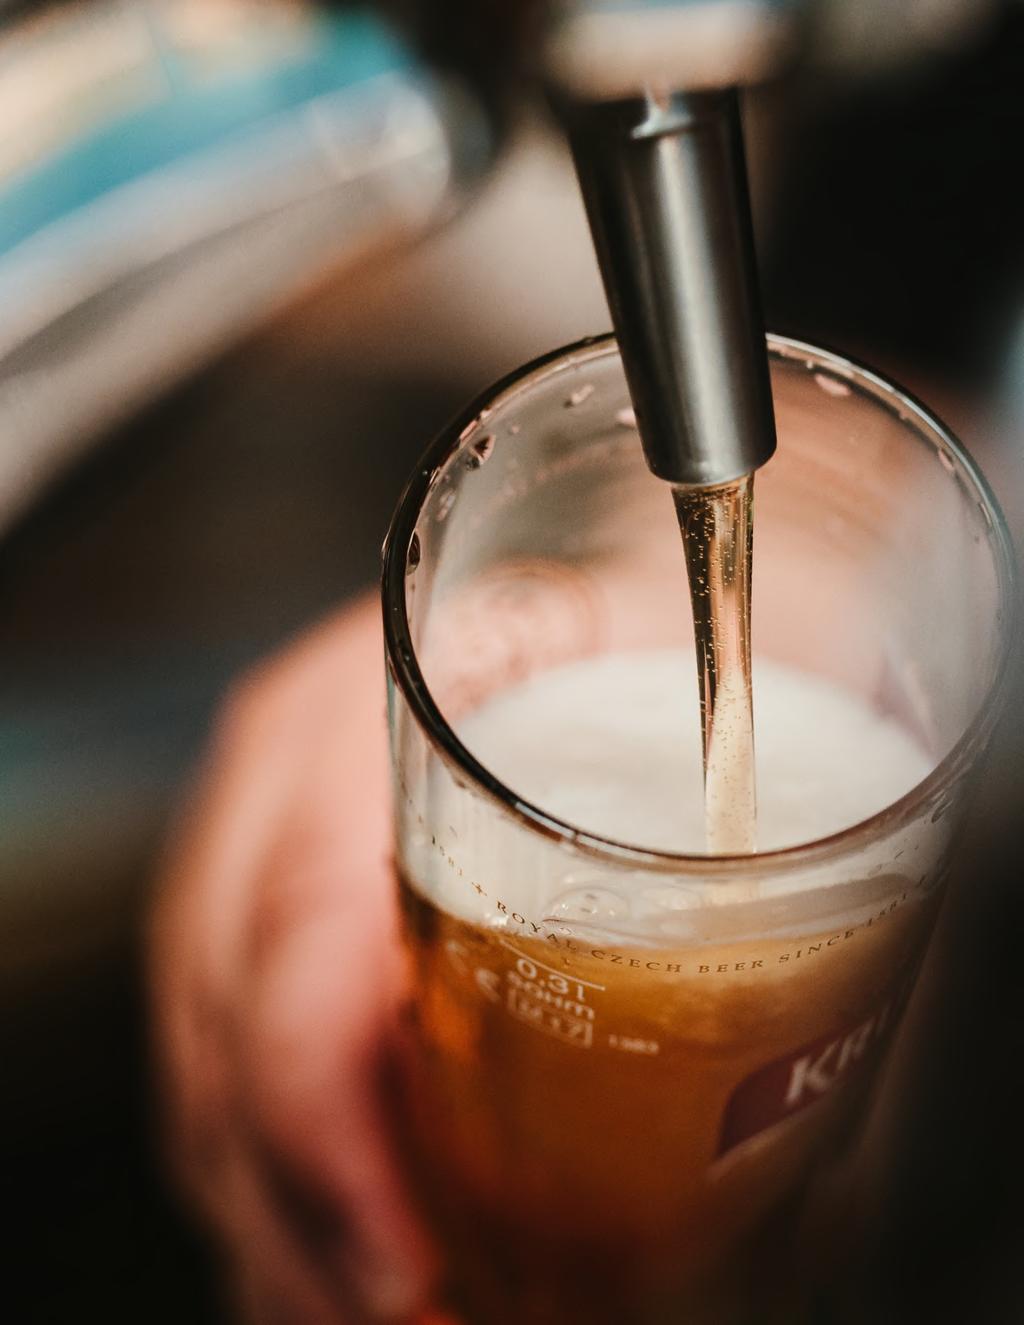 BUILDING A TOP OF THE LINE DRAFT SYSTEM Easybar ensures that the planning and installation process for your draft beer system is enjoyable and efficient.